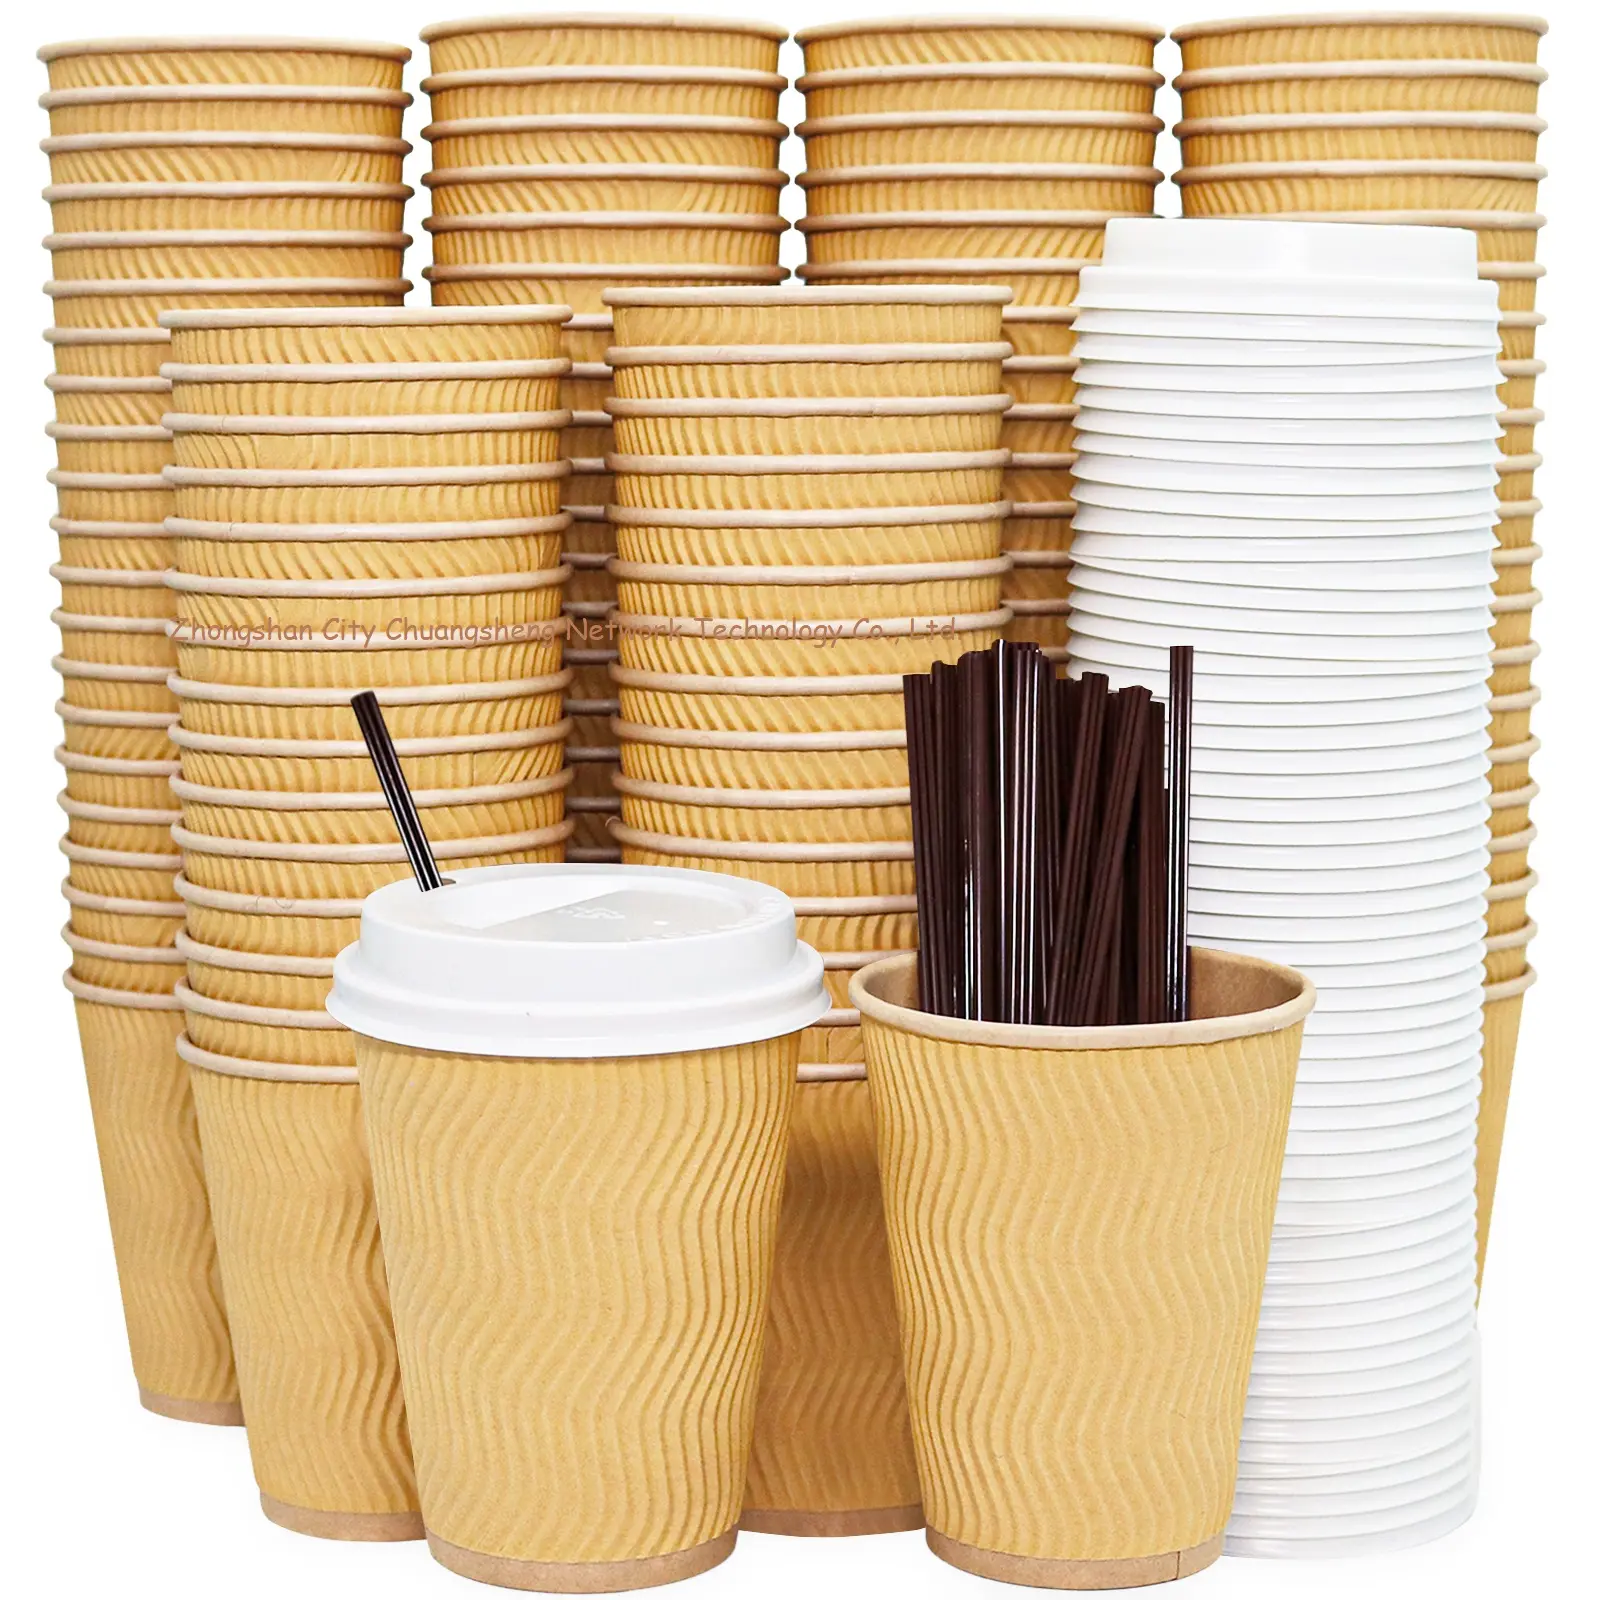 Dispos Plain Party Biodegrad Eco Disposable Double Wall With Plastic Lid Printing Coffee 16 Oz Cardboard Cheap Pla Paper Cups Ml